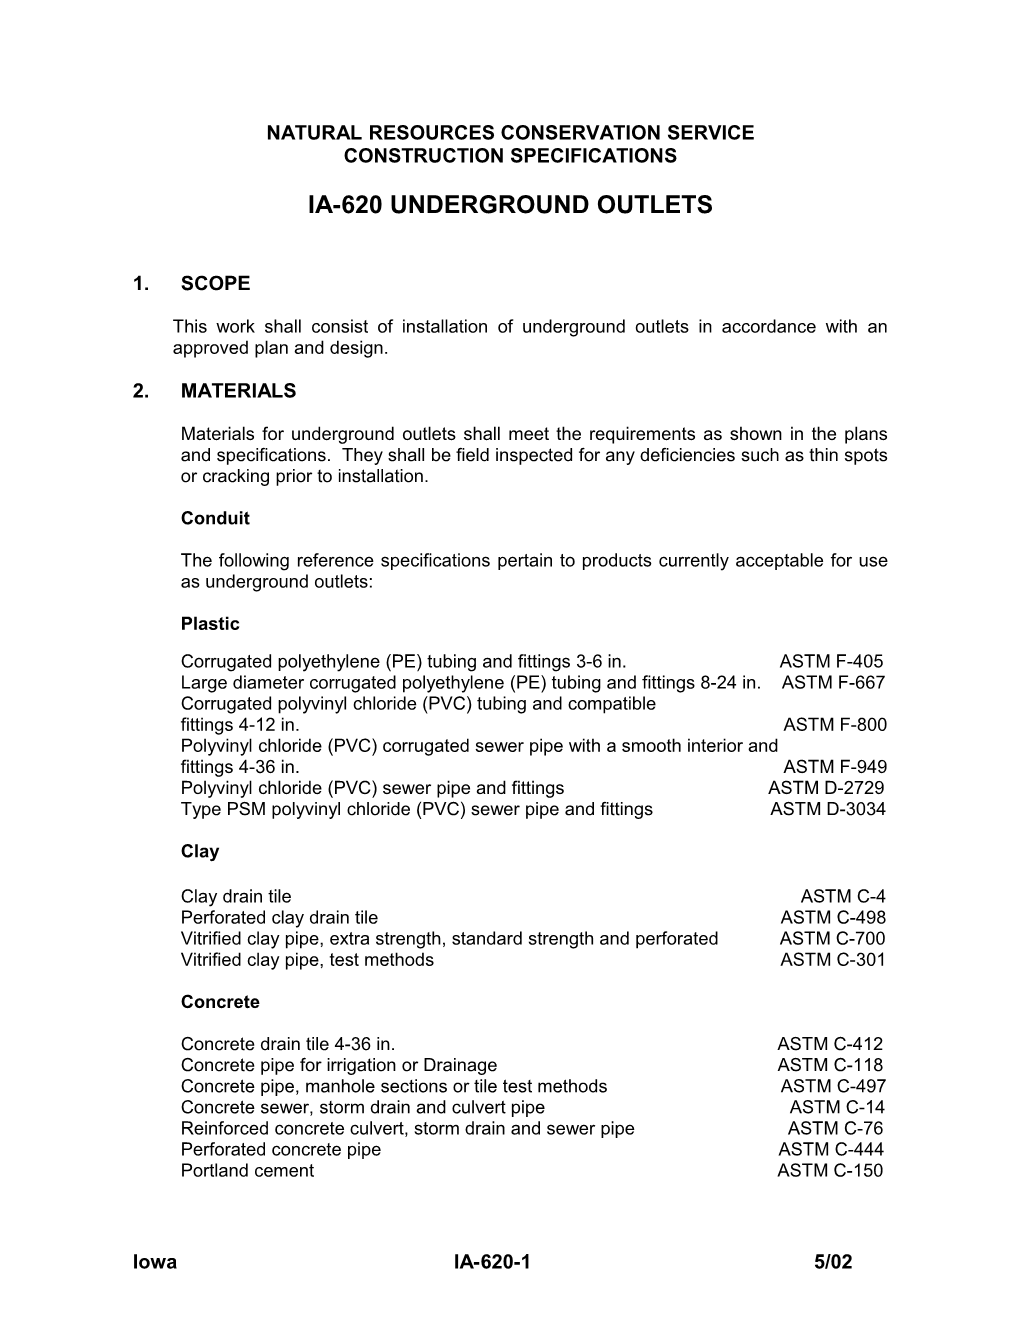 Construction Specification for Underground Outlets